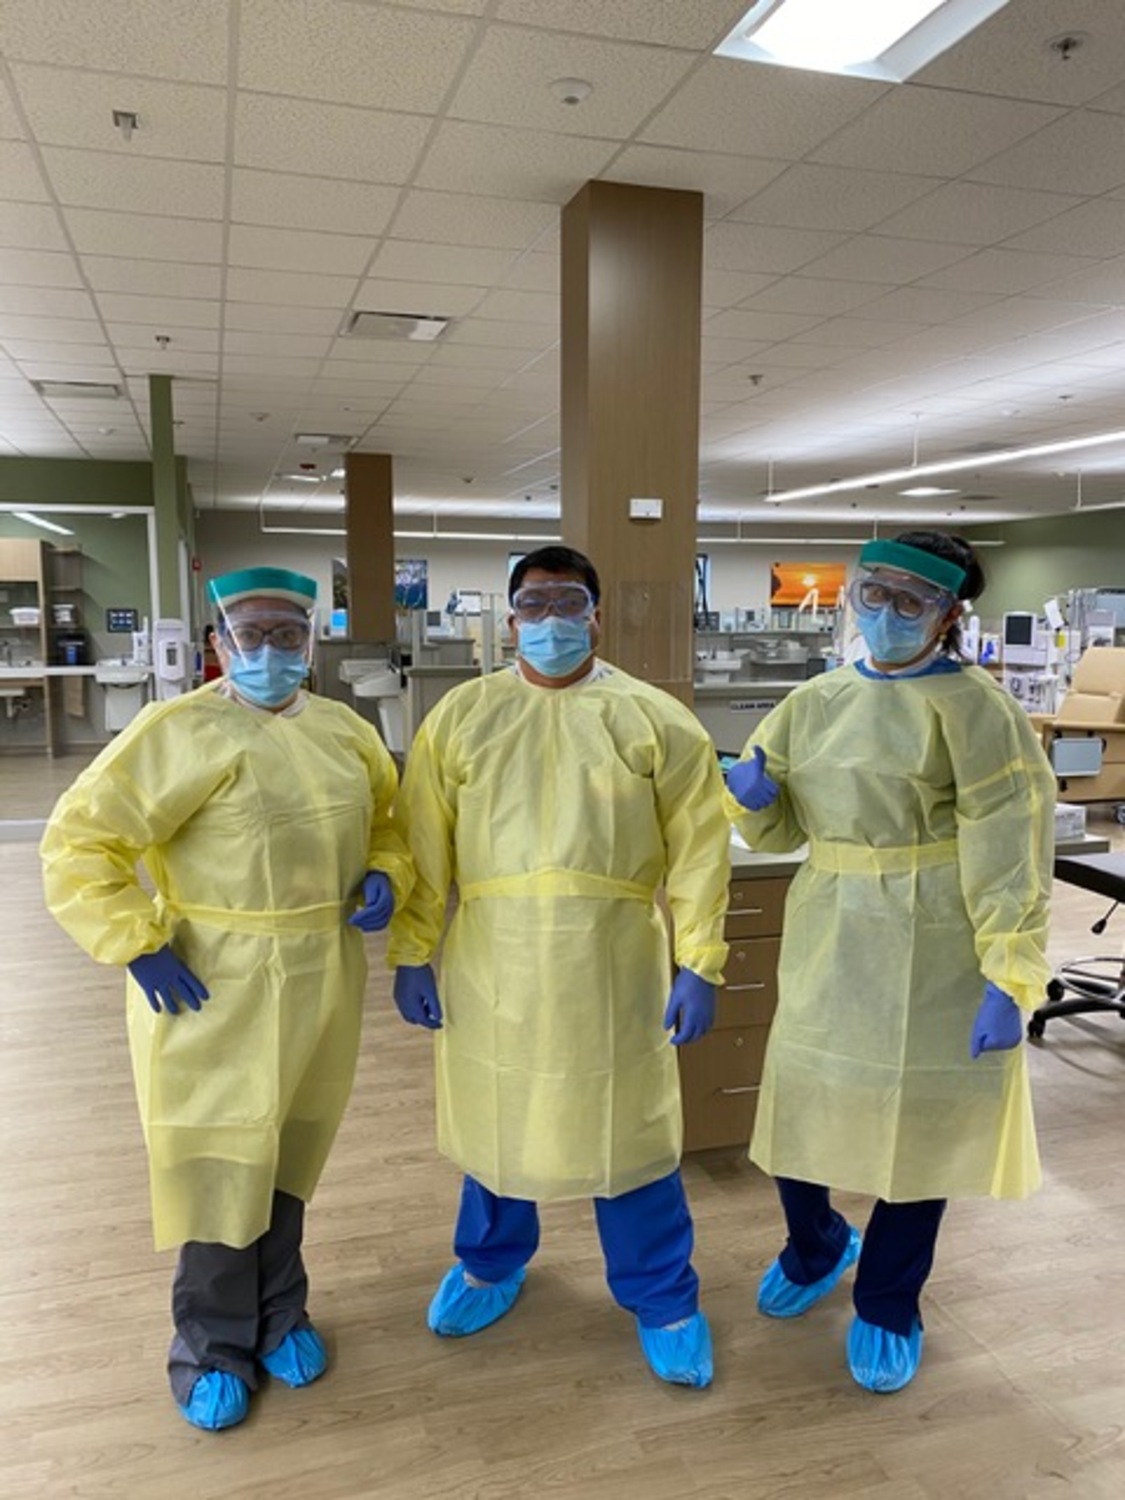 Our clinical teams work hard to be there for patients and show up in their proper personal protective equipment.